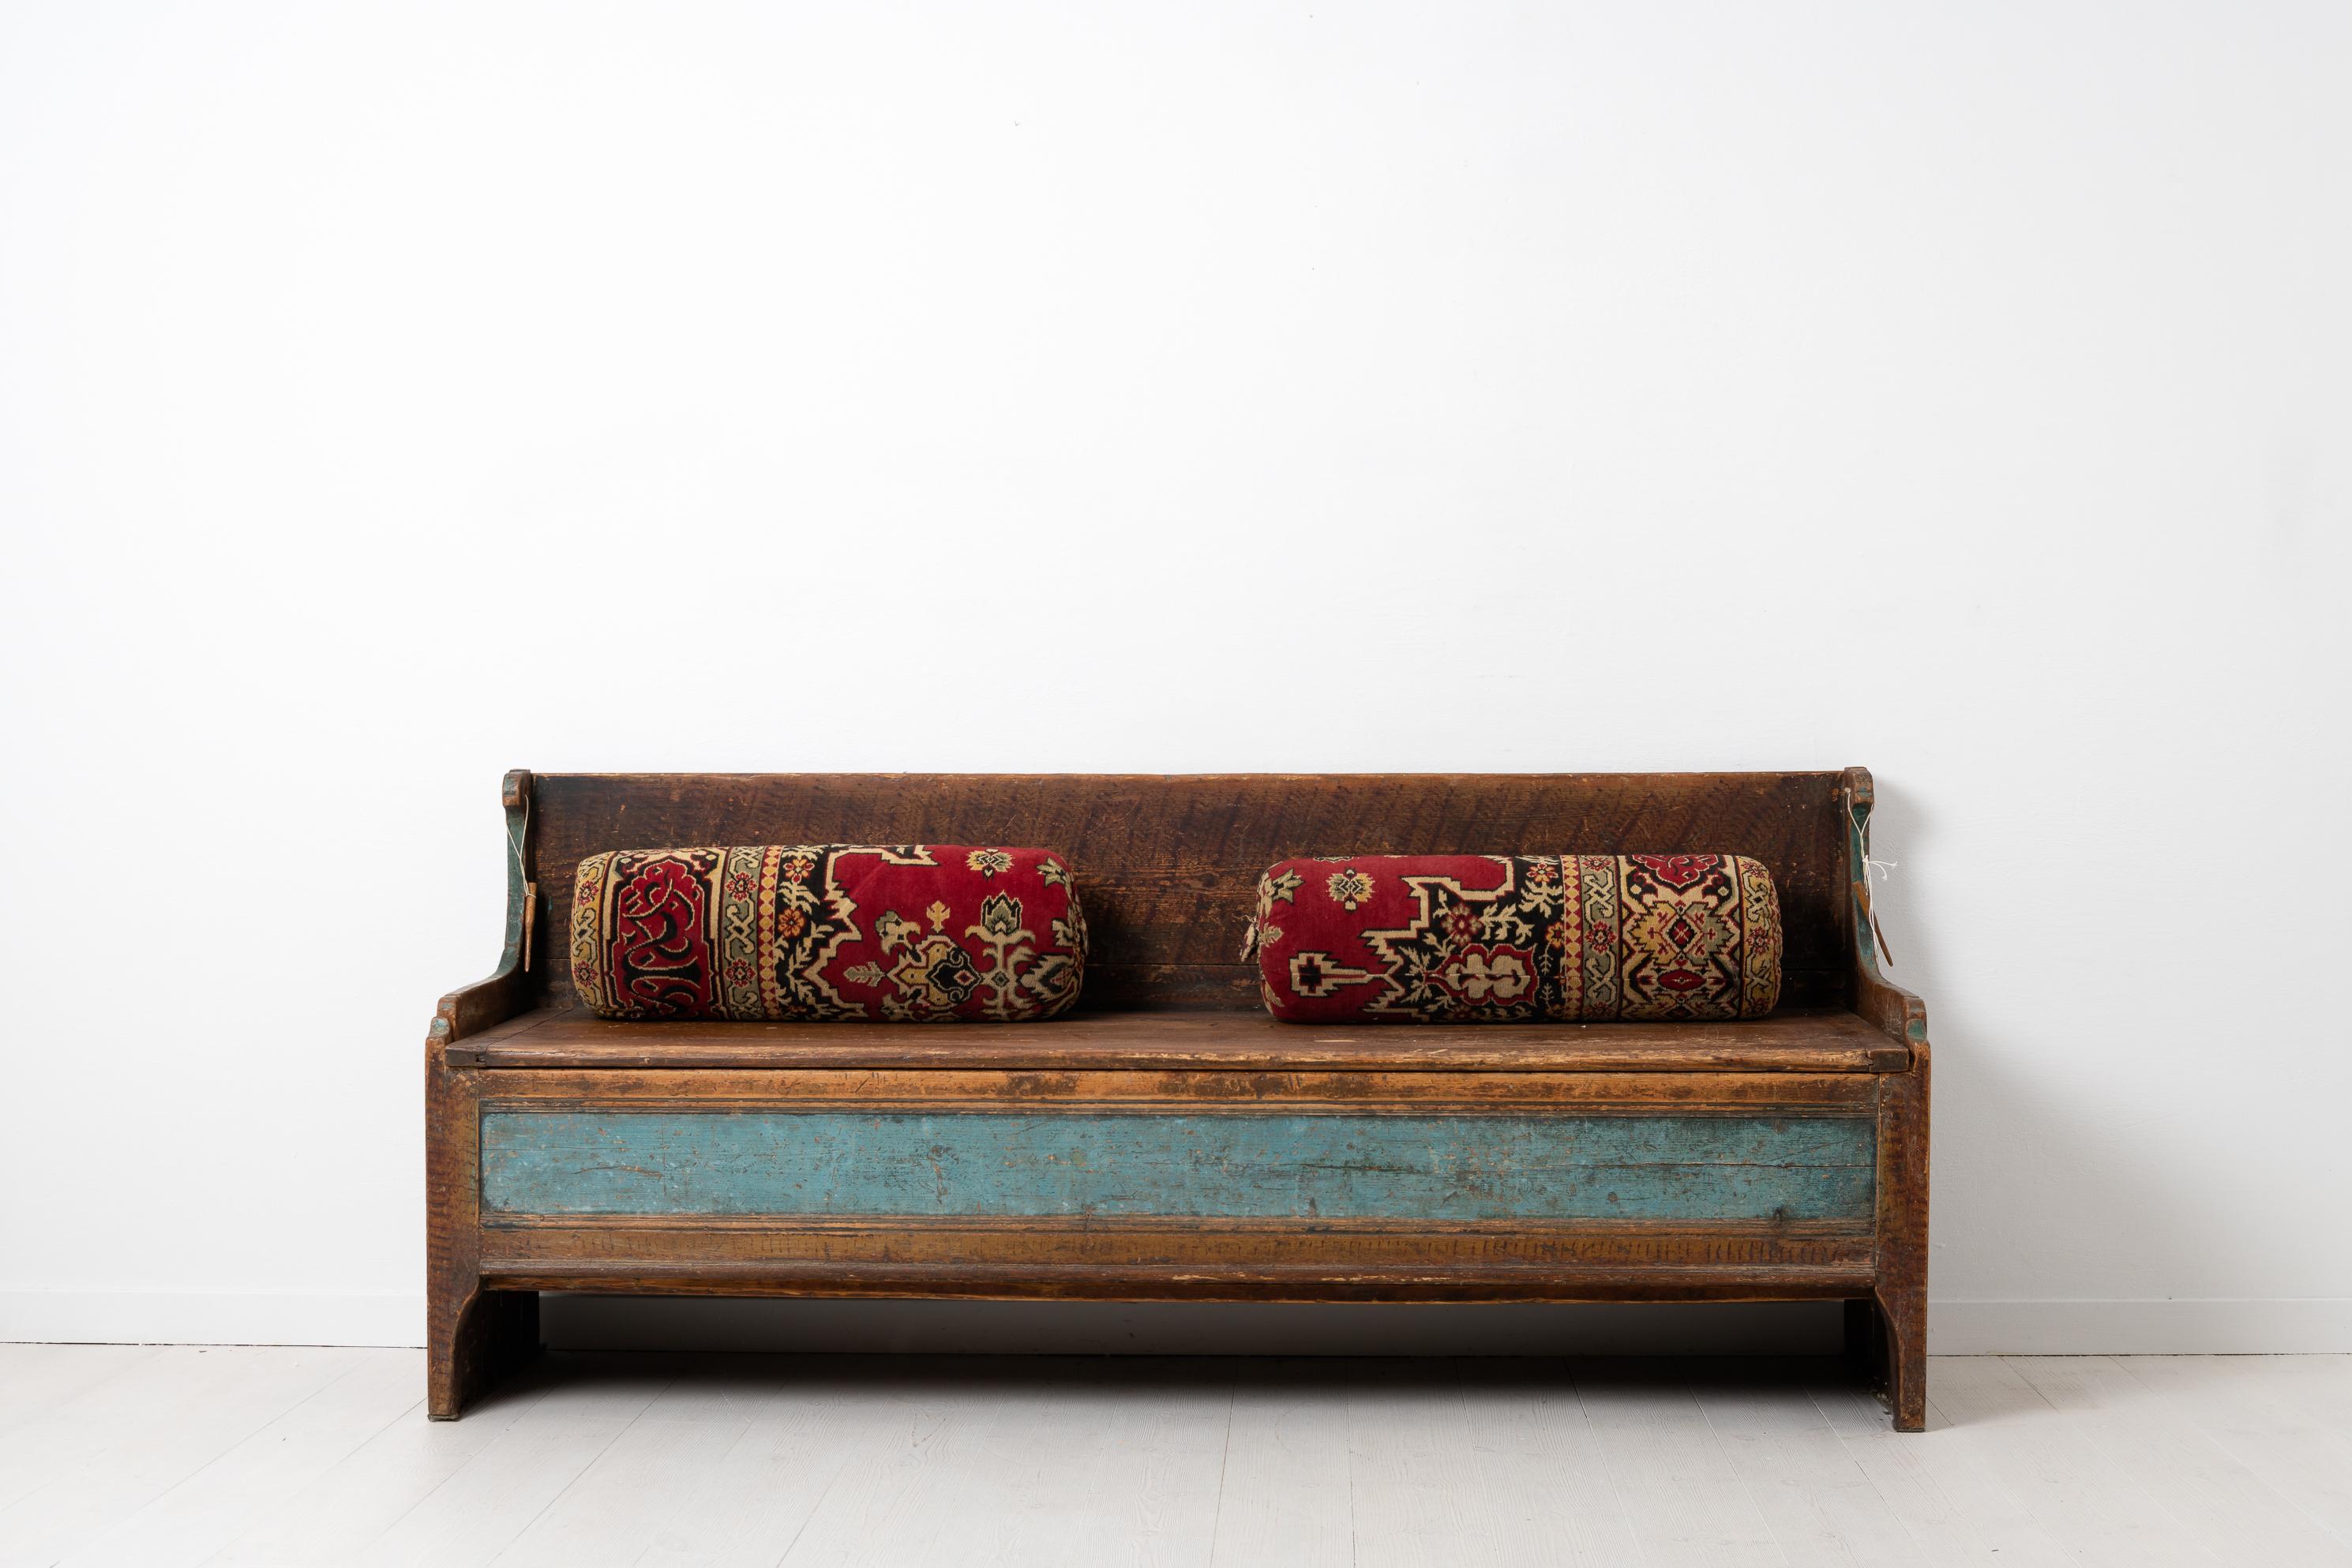 Swedish late 1700s country bench made in Swedish pine. The bench, a so called fållbänk, is folk art and in untouched original condition. The bench have the original faux paint and painted blue panel at the front as well as a completely genuine